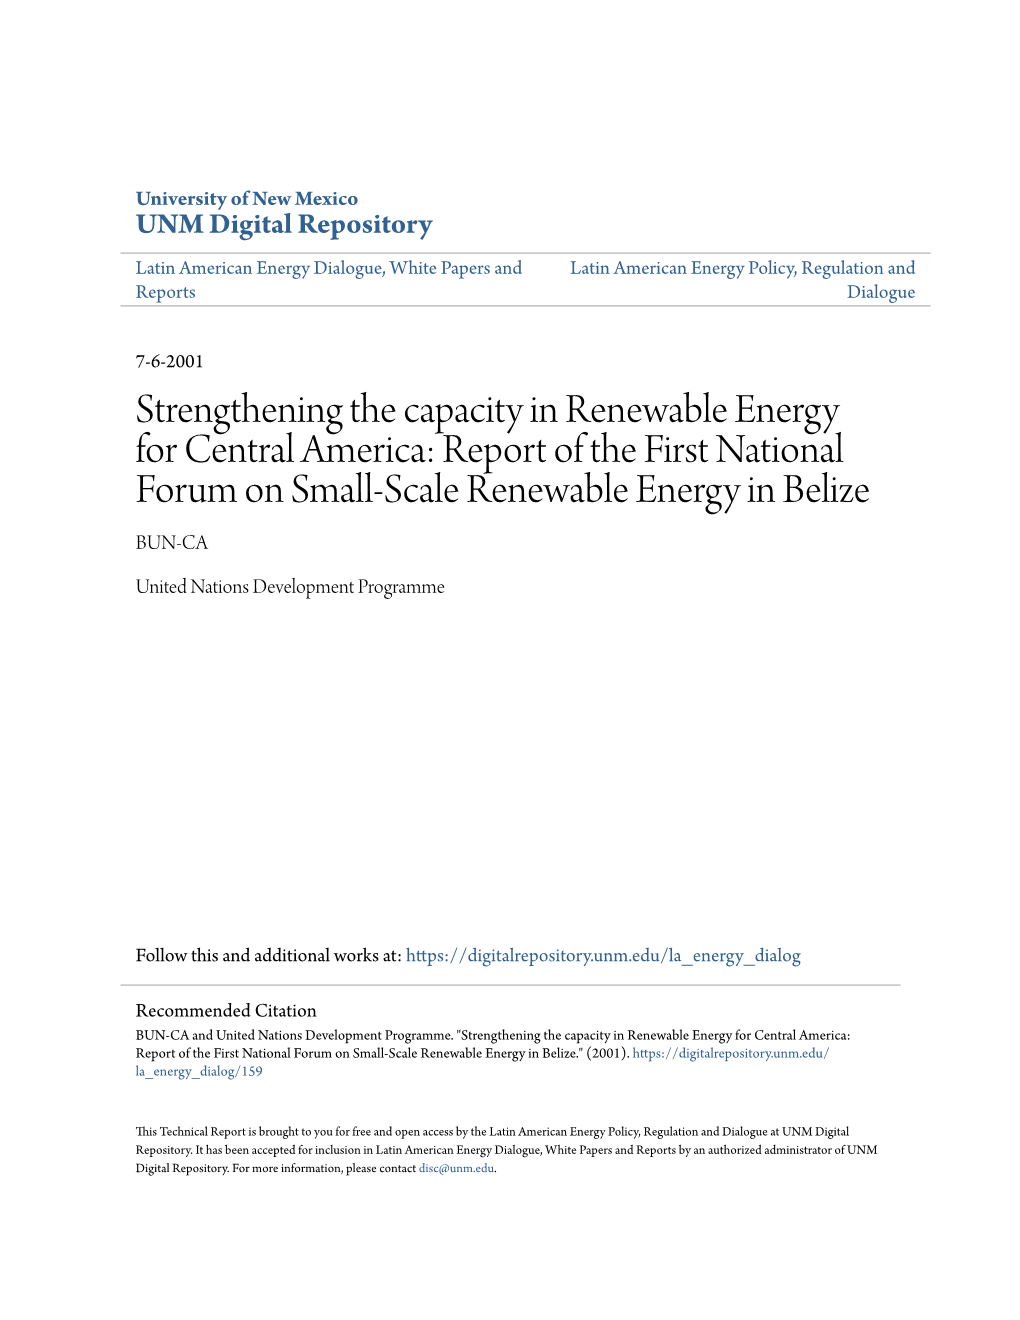 Strengthening the Capacity in Renewable Energy for Central America: Report of the First National Forum on Small-Scale Renewable Energy in Belize BUN-CA